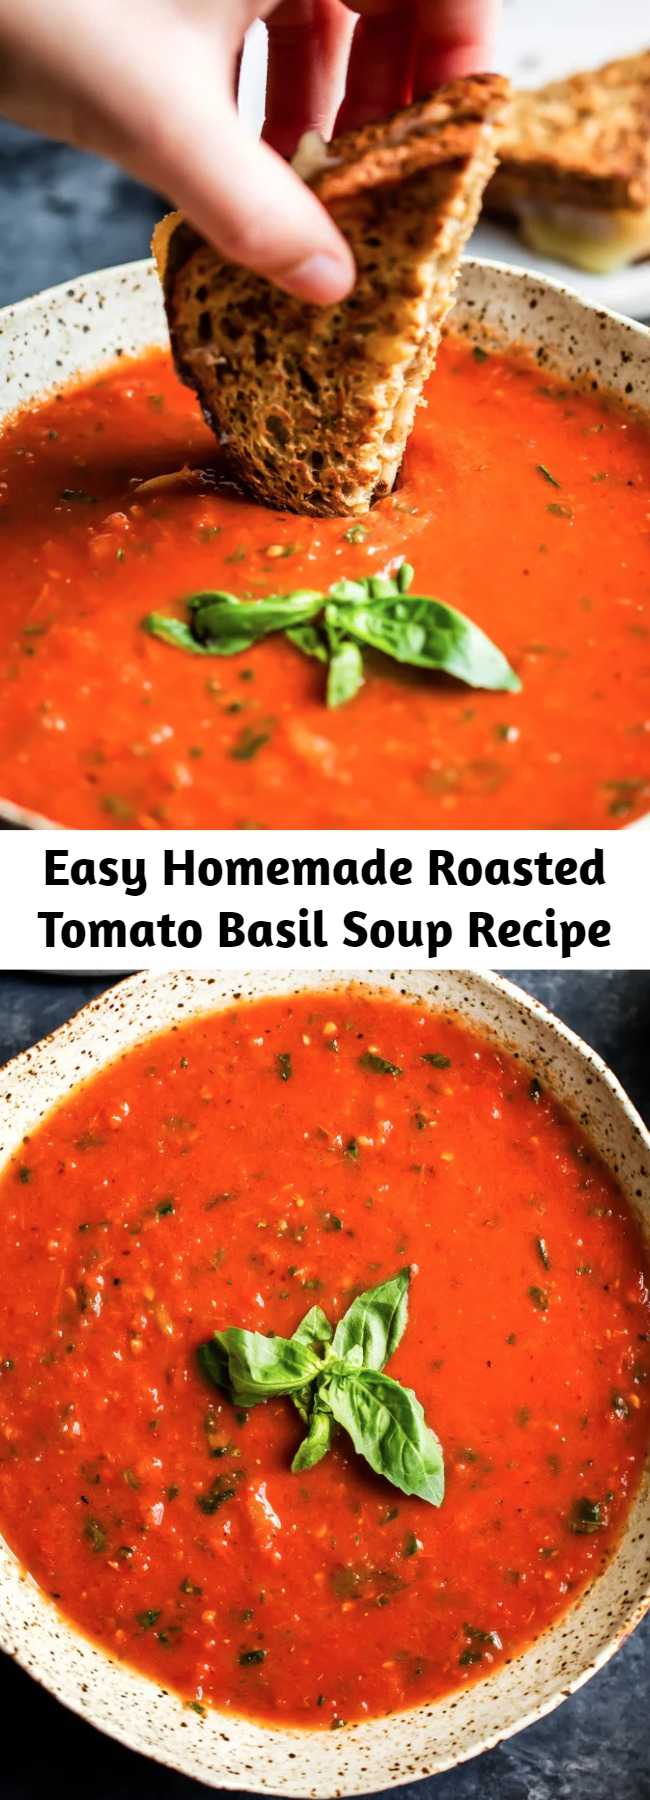 Easy Homemade Roasted Tomato Basil Soup Recipe - The Best homemade roasted tomato basil soup with fresh tomatoes, garlic, olive oil and caramelized onions and optional add-ins for extra creaminess. Delicious, flavorful and the best way to use up garden tomatoes! You’ll never want to go back to the canned stuff after you try this. #tomatoes #tomatosoup #homemadesoup #tomatorecipe #healthylunch #vegetarian #vegan #glutenfree